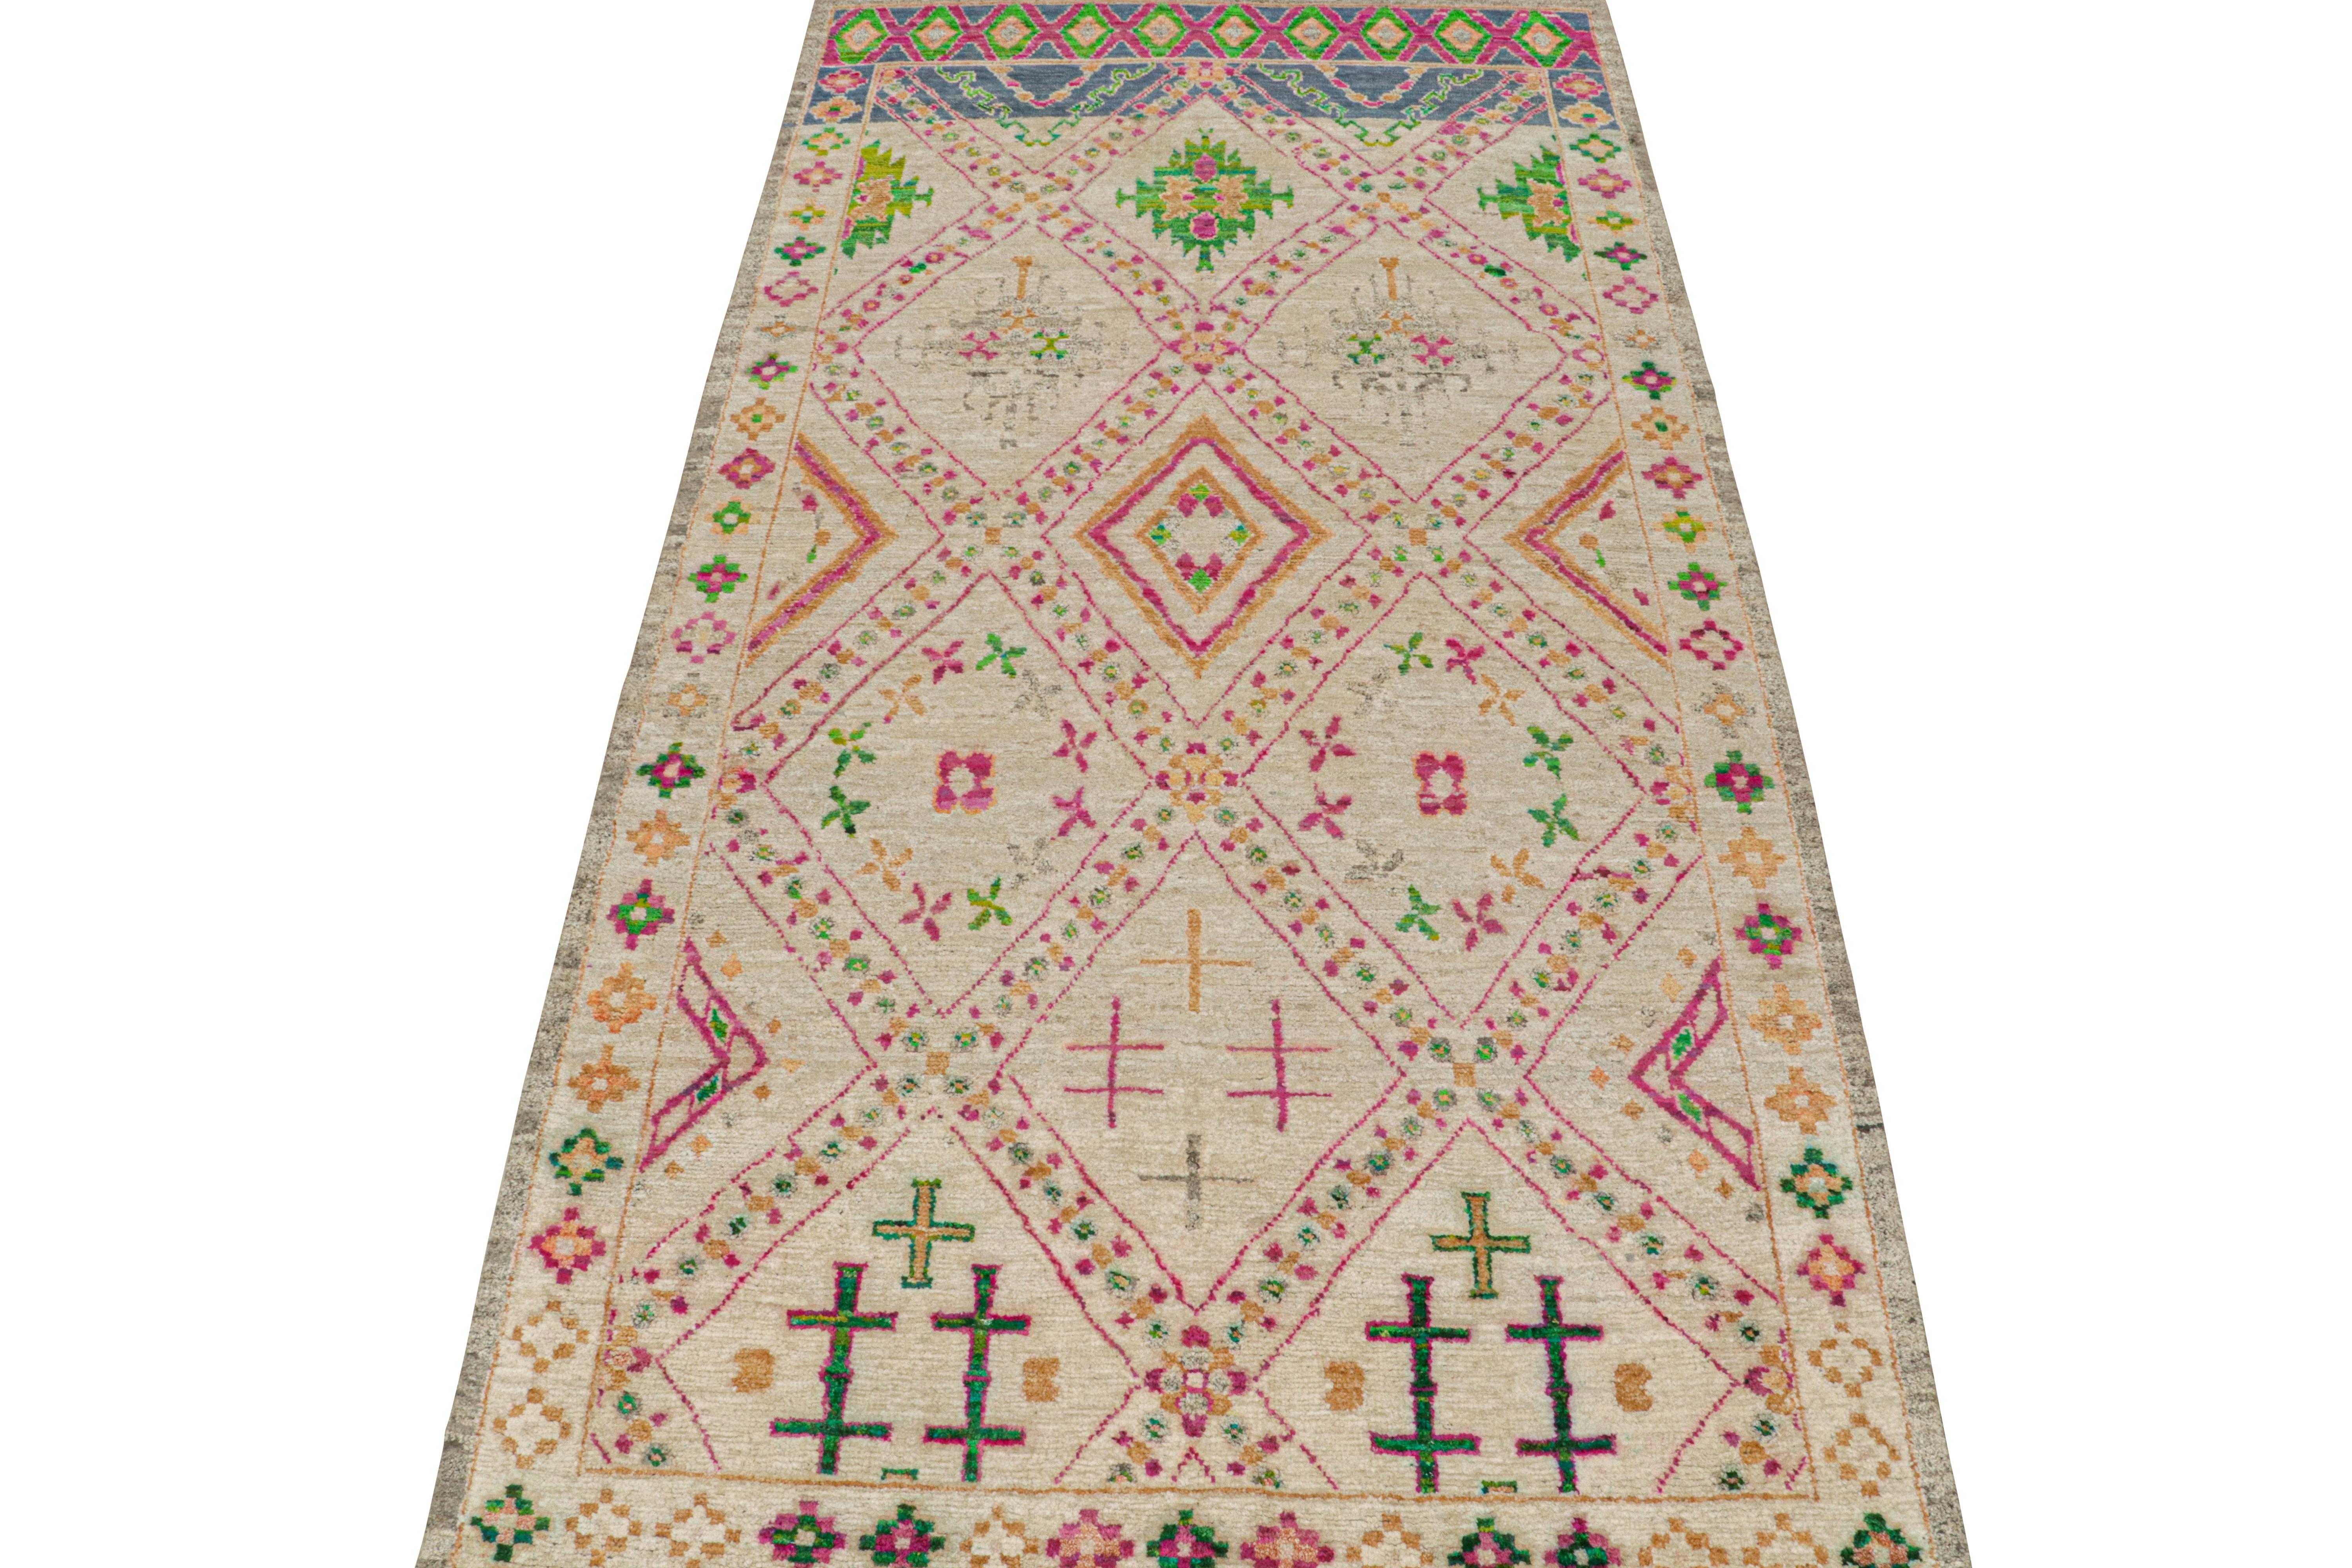 This 7x15 gallery runner is a new addition to Rug & Kilim’s Moroccan rug collection. Hand-knotted in wool and silk, its design recaptures the classic tribal sensibility in a new modern quality.

This whimsical design enjoys vibrant geometric